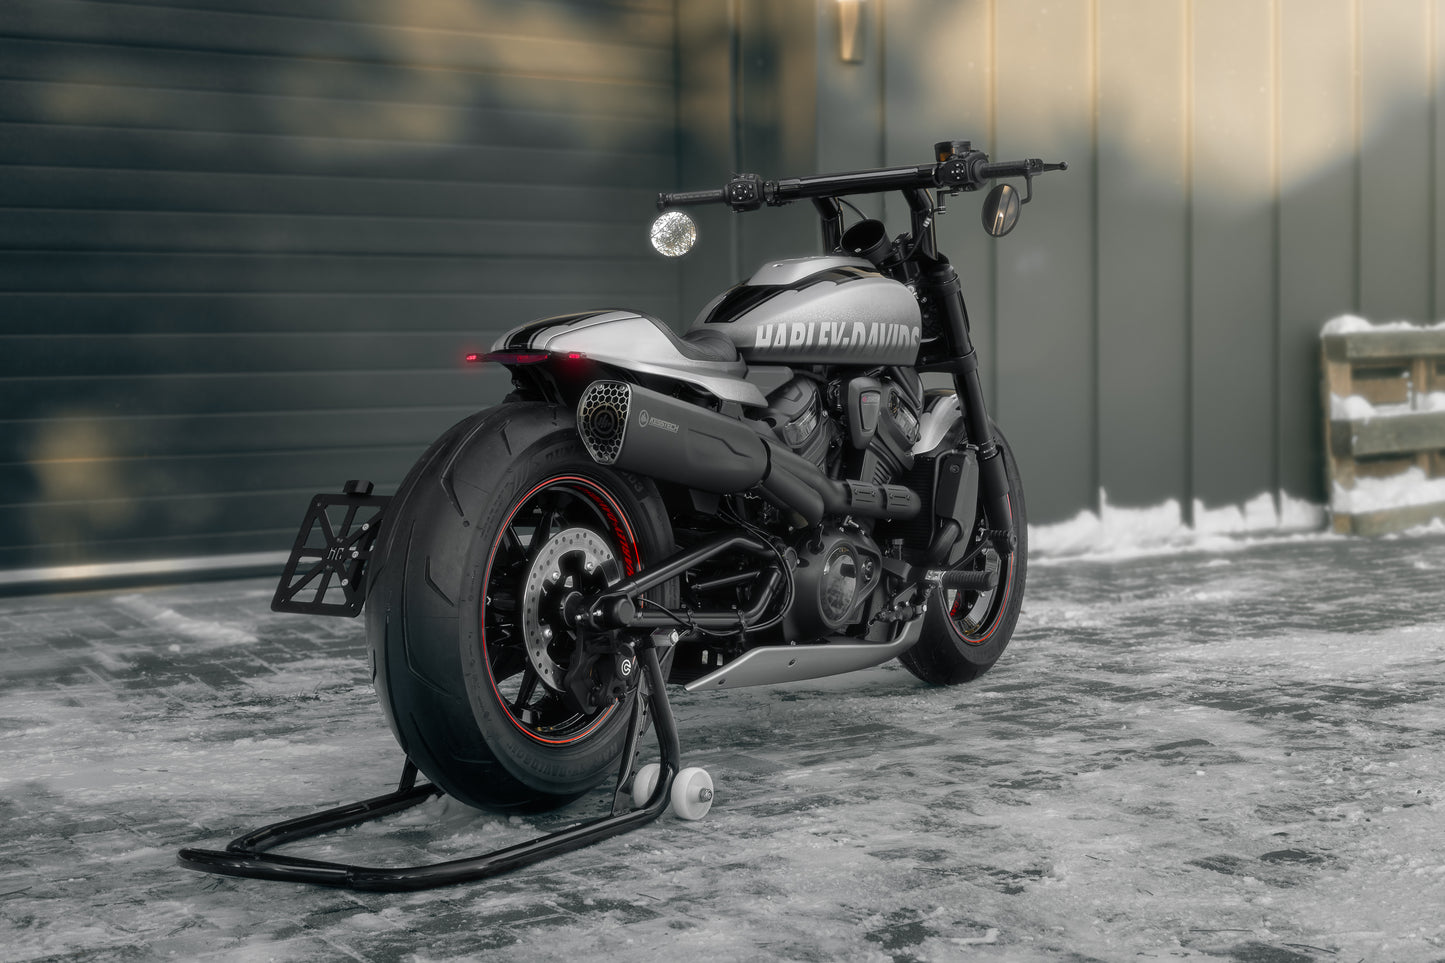 Harley Davidson motorcycle with Killer Custom "Killer Bull" t-bar from the rear outside in front of the modern garage with visible snow on the ground